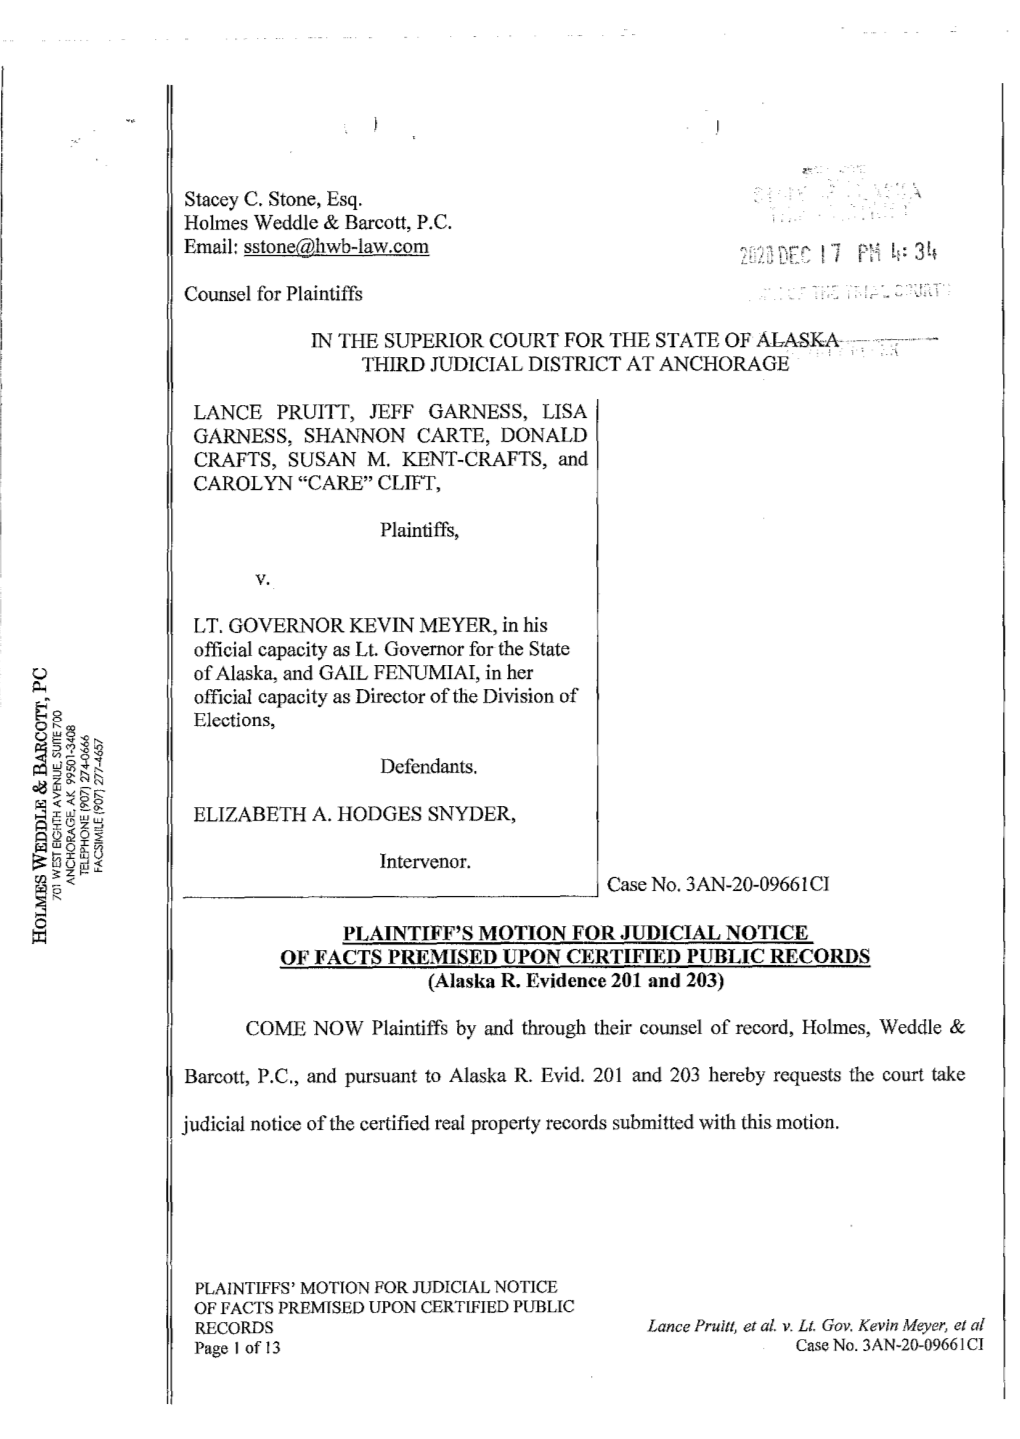 PLAINTIFF's MOTION for JUDICIAL NOTICE of FACTS PREMISED UPON CERTIFIED PUBLIC RECORDS (Alaska R